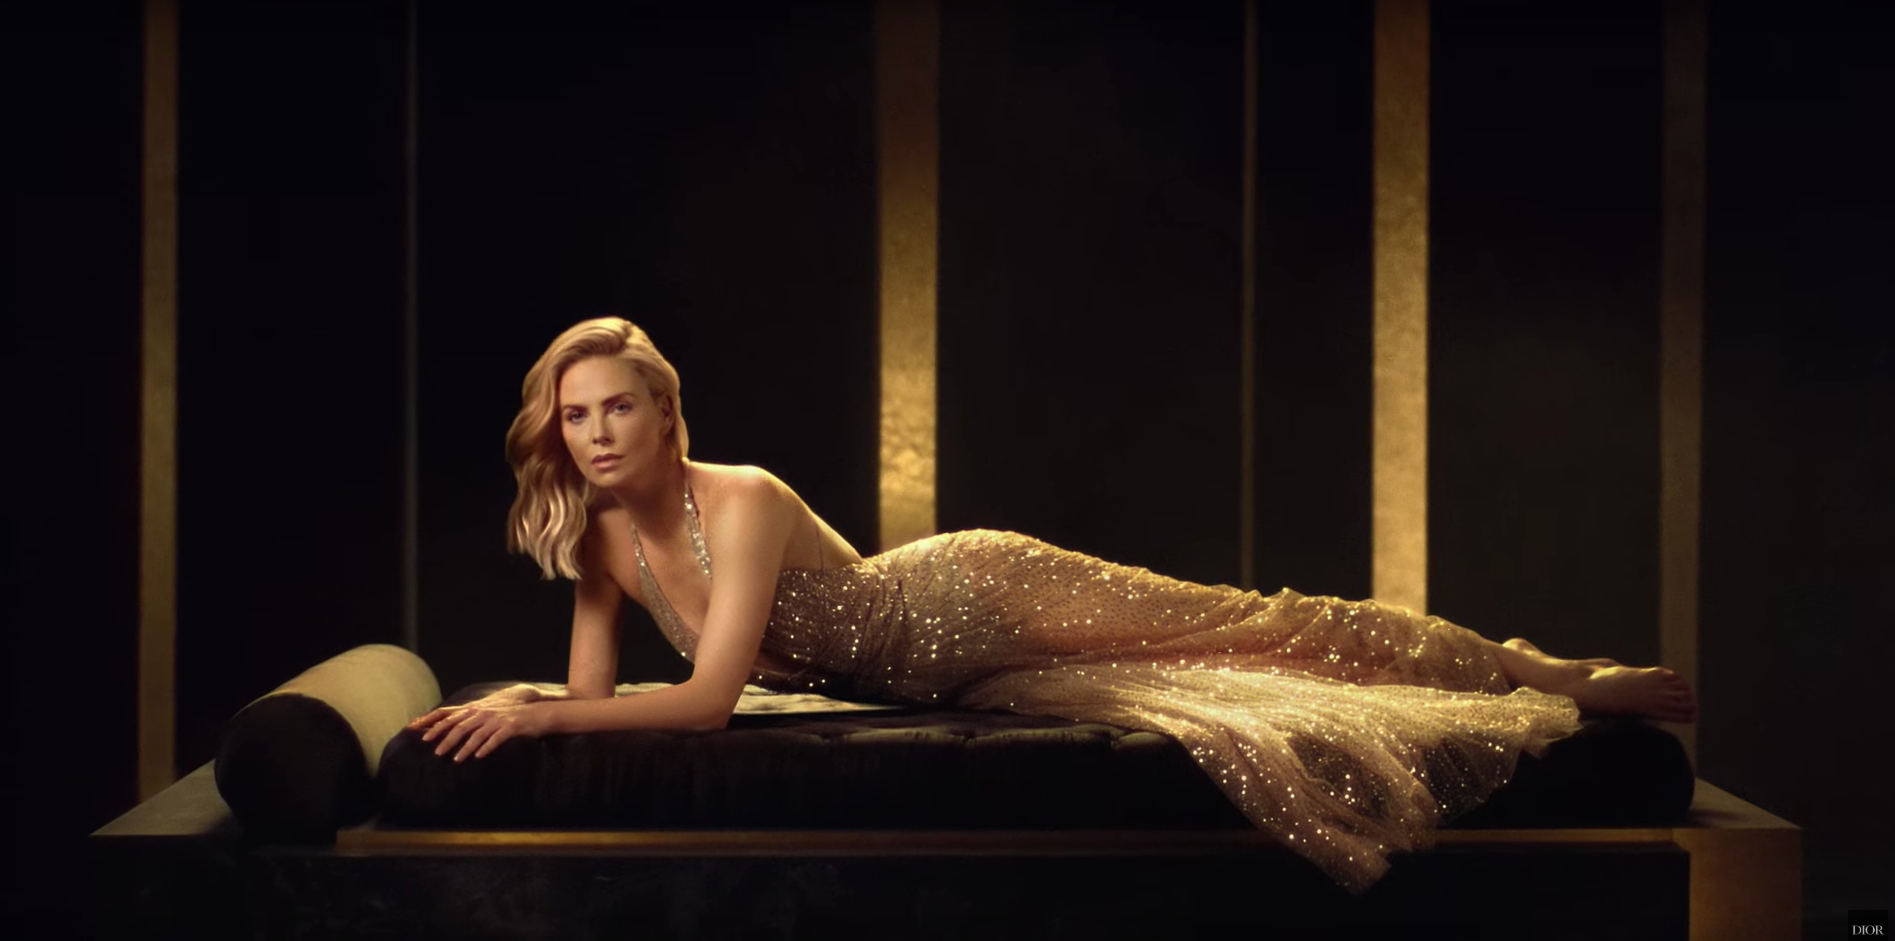 Charlize Theron alongside cinema icons for jadore Dior  nevermindthemode